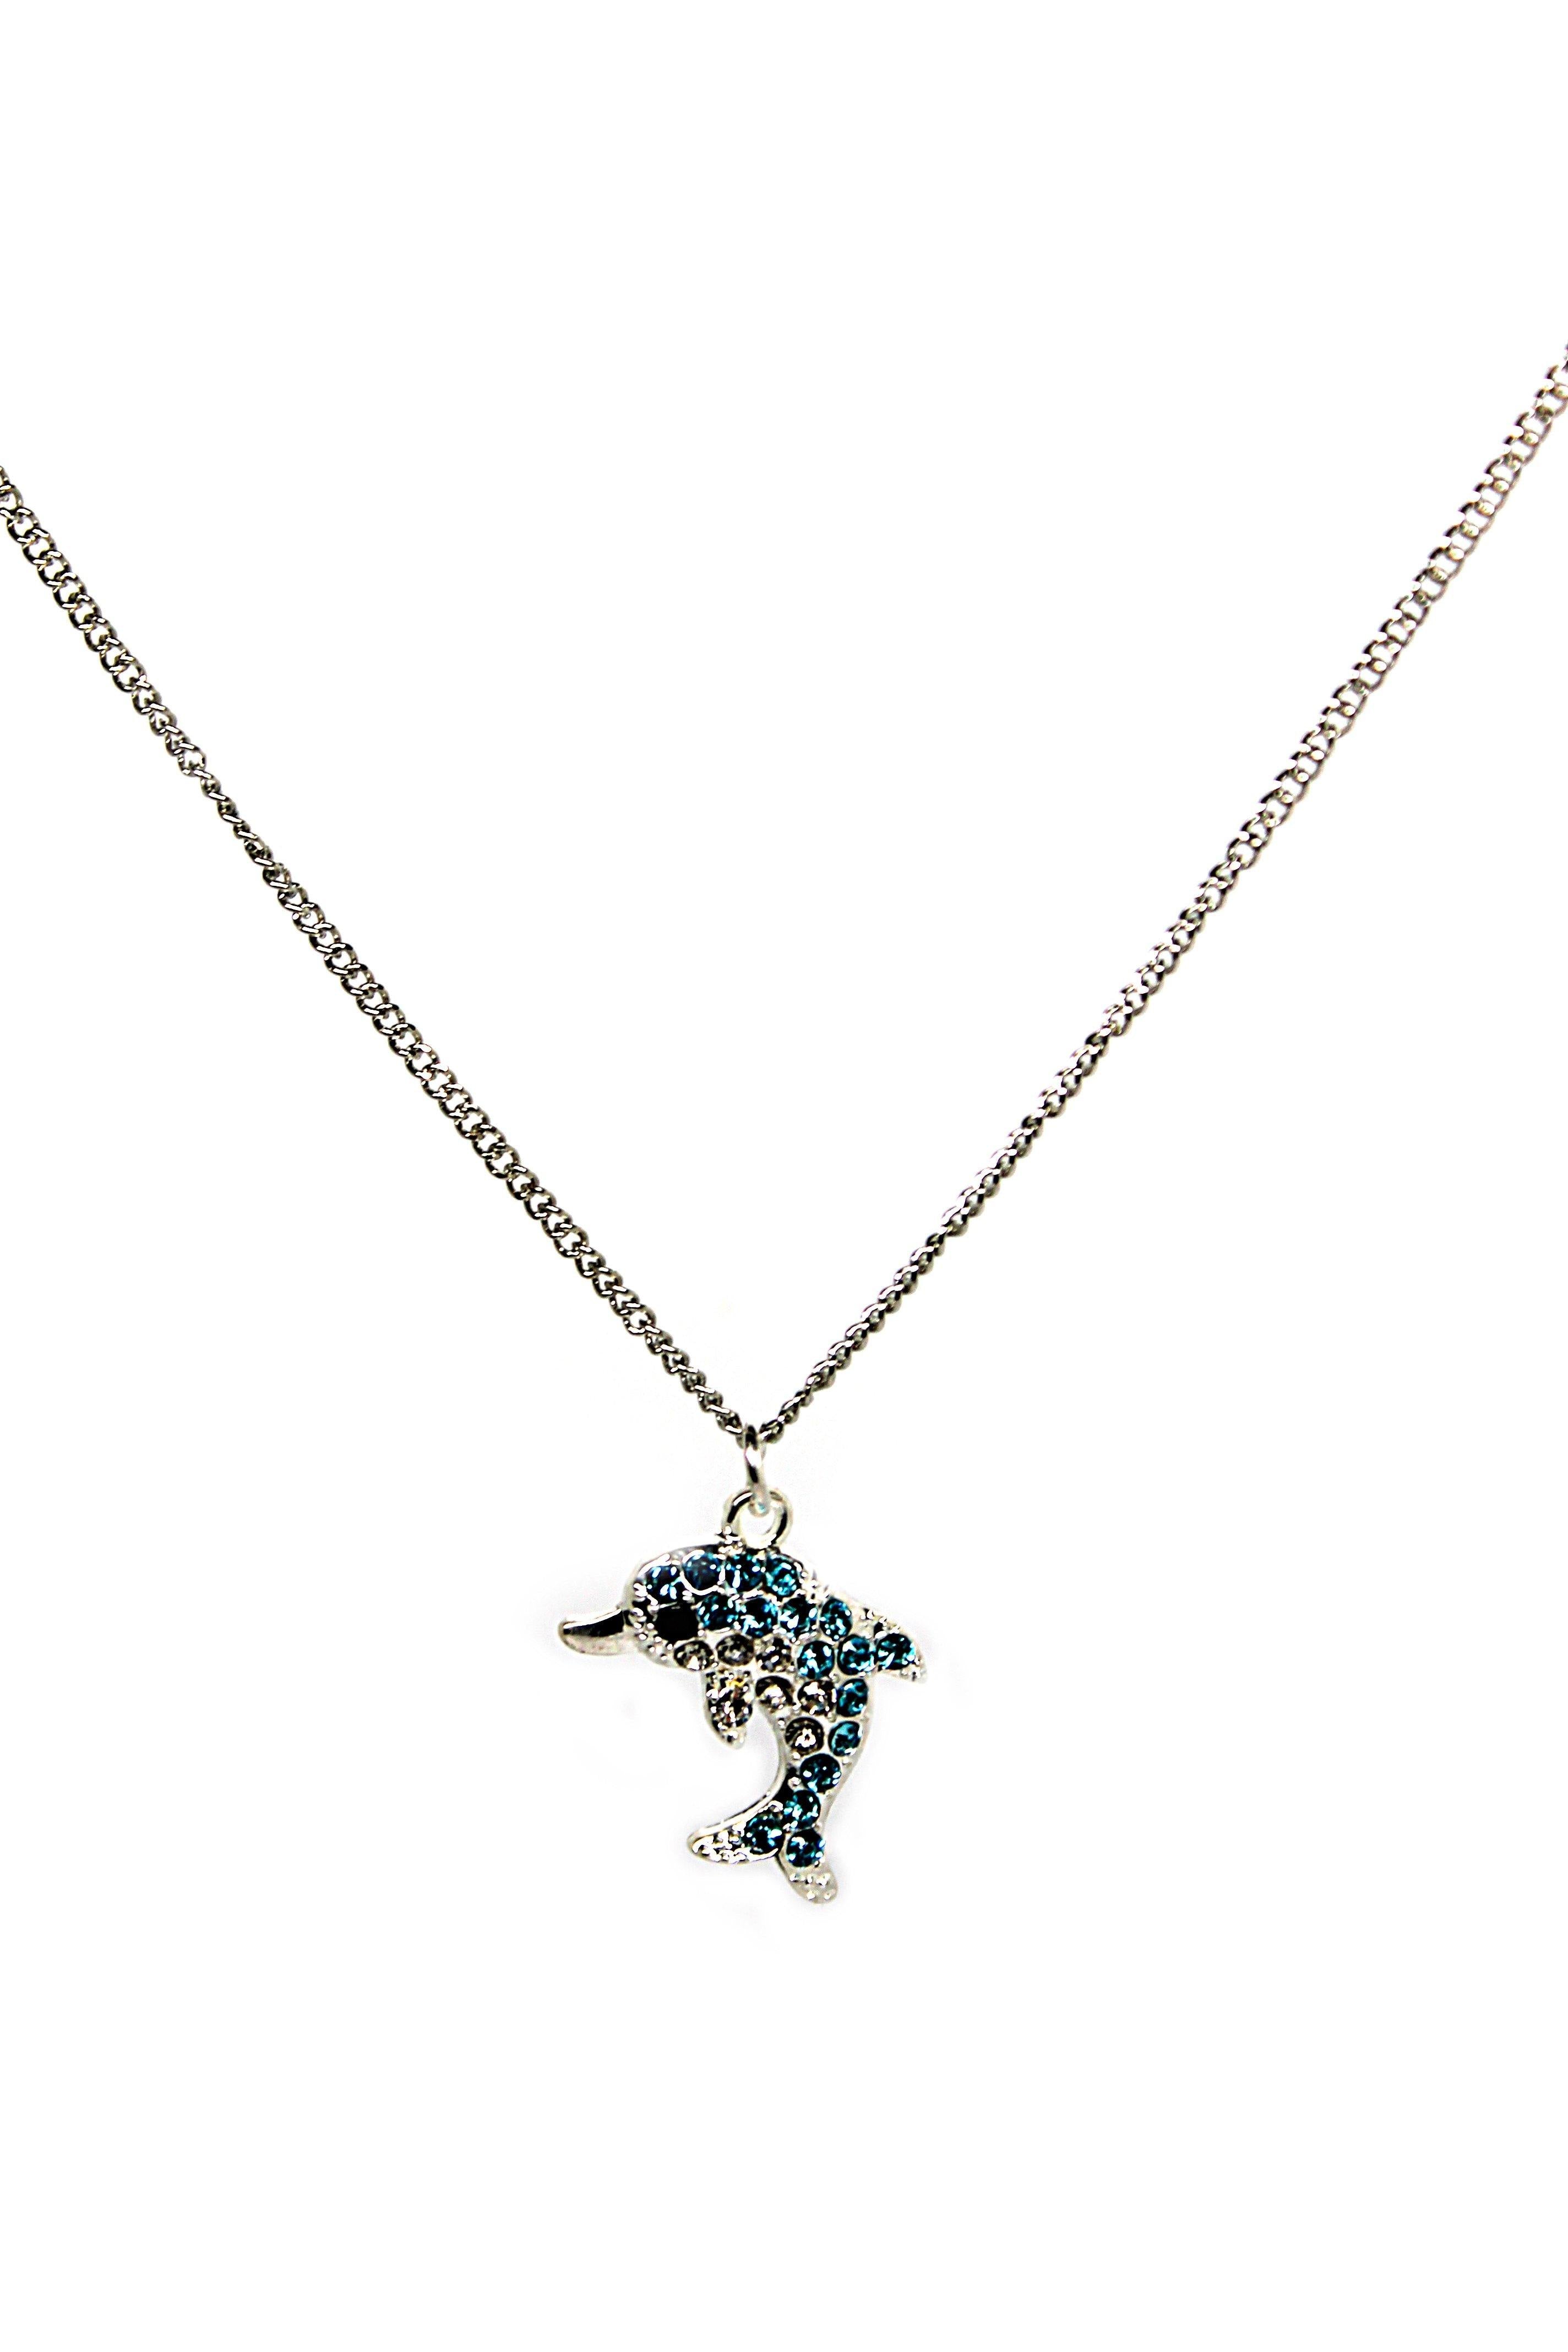 Dolphin Necklace - Wildtouch - Wildtouch